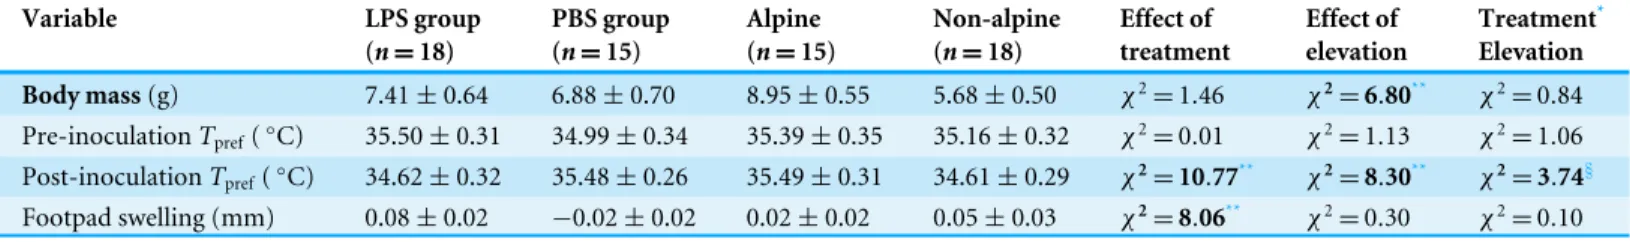 Table 1 Average values ± standard errors of body mass, preferential body temperature ( T pref ) before and after the inoculations, and inflamma- inflamma-tion response (sole-pad swelling in mm), for both groups (LPS and PBS), as well as for alpine (2,200–2